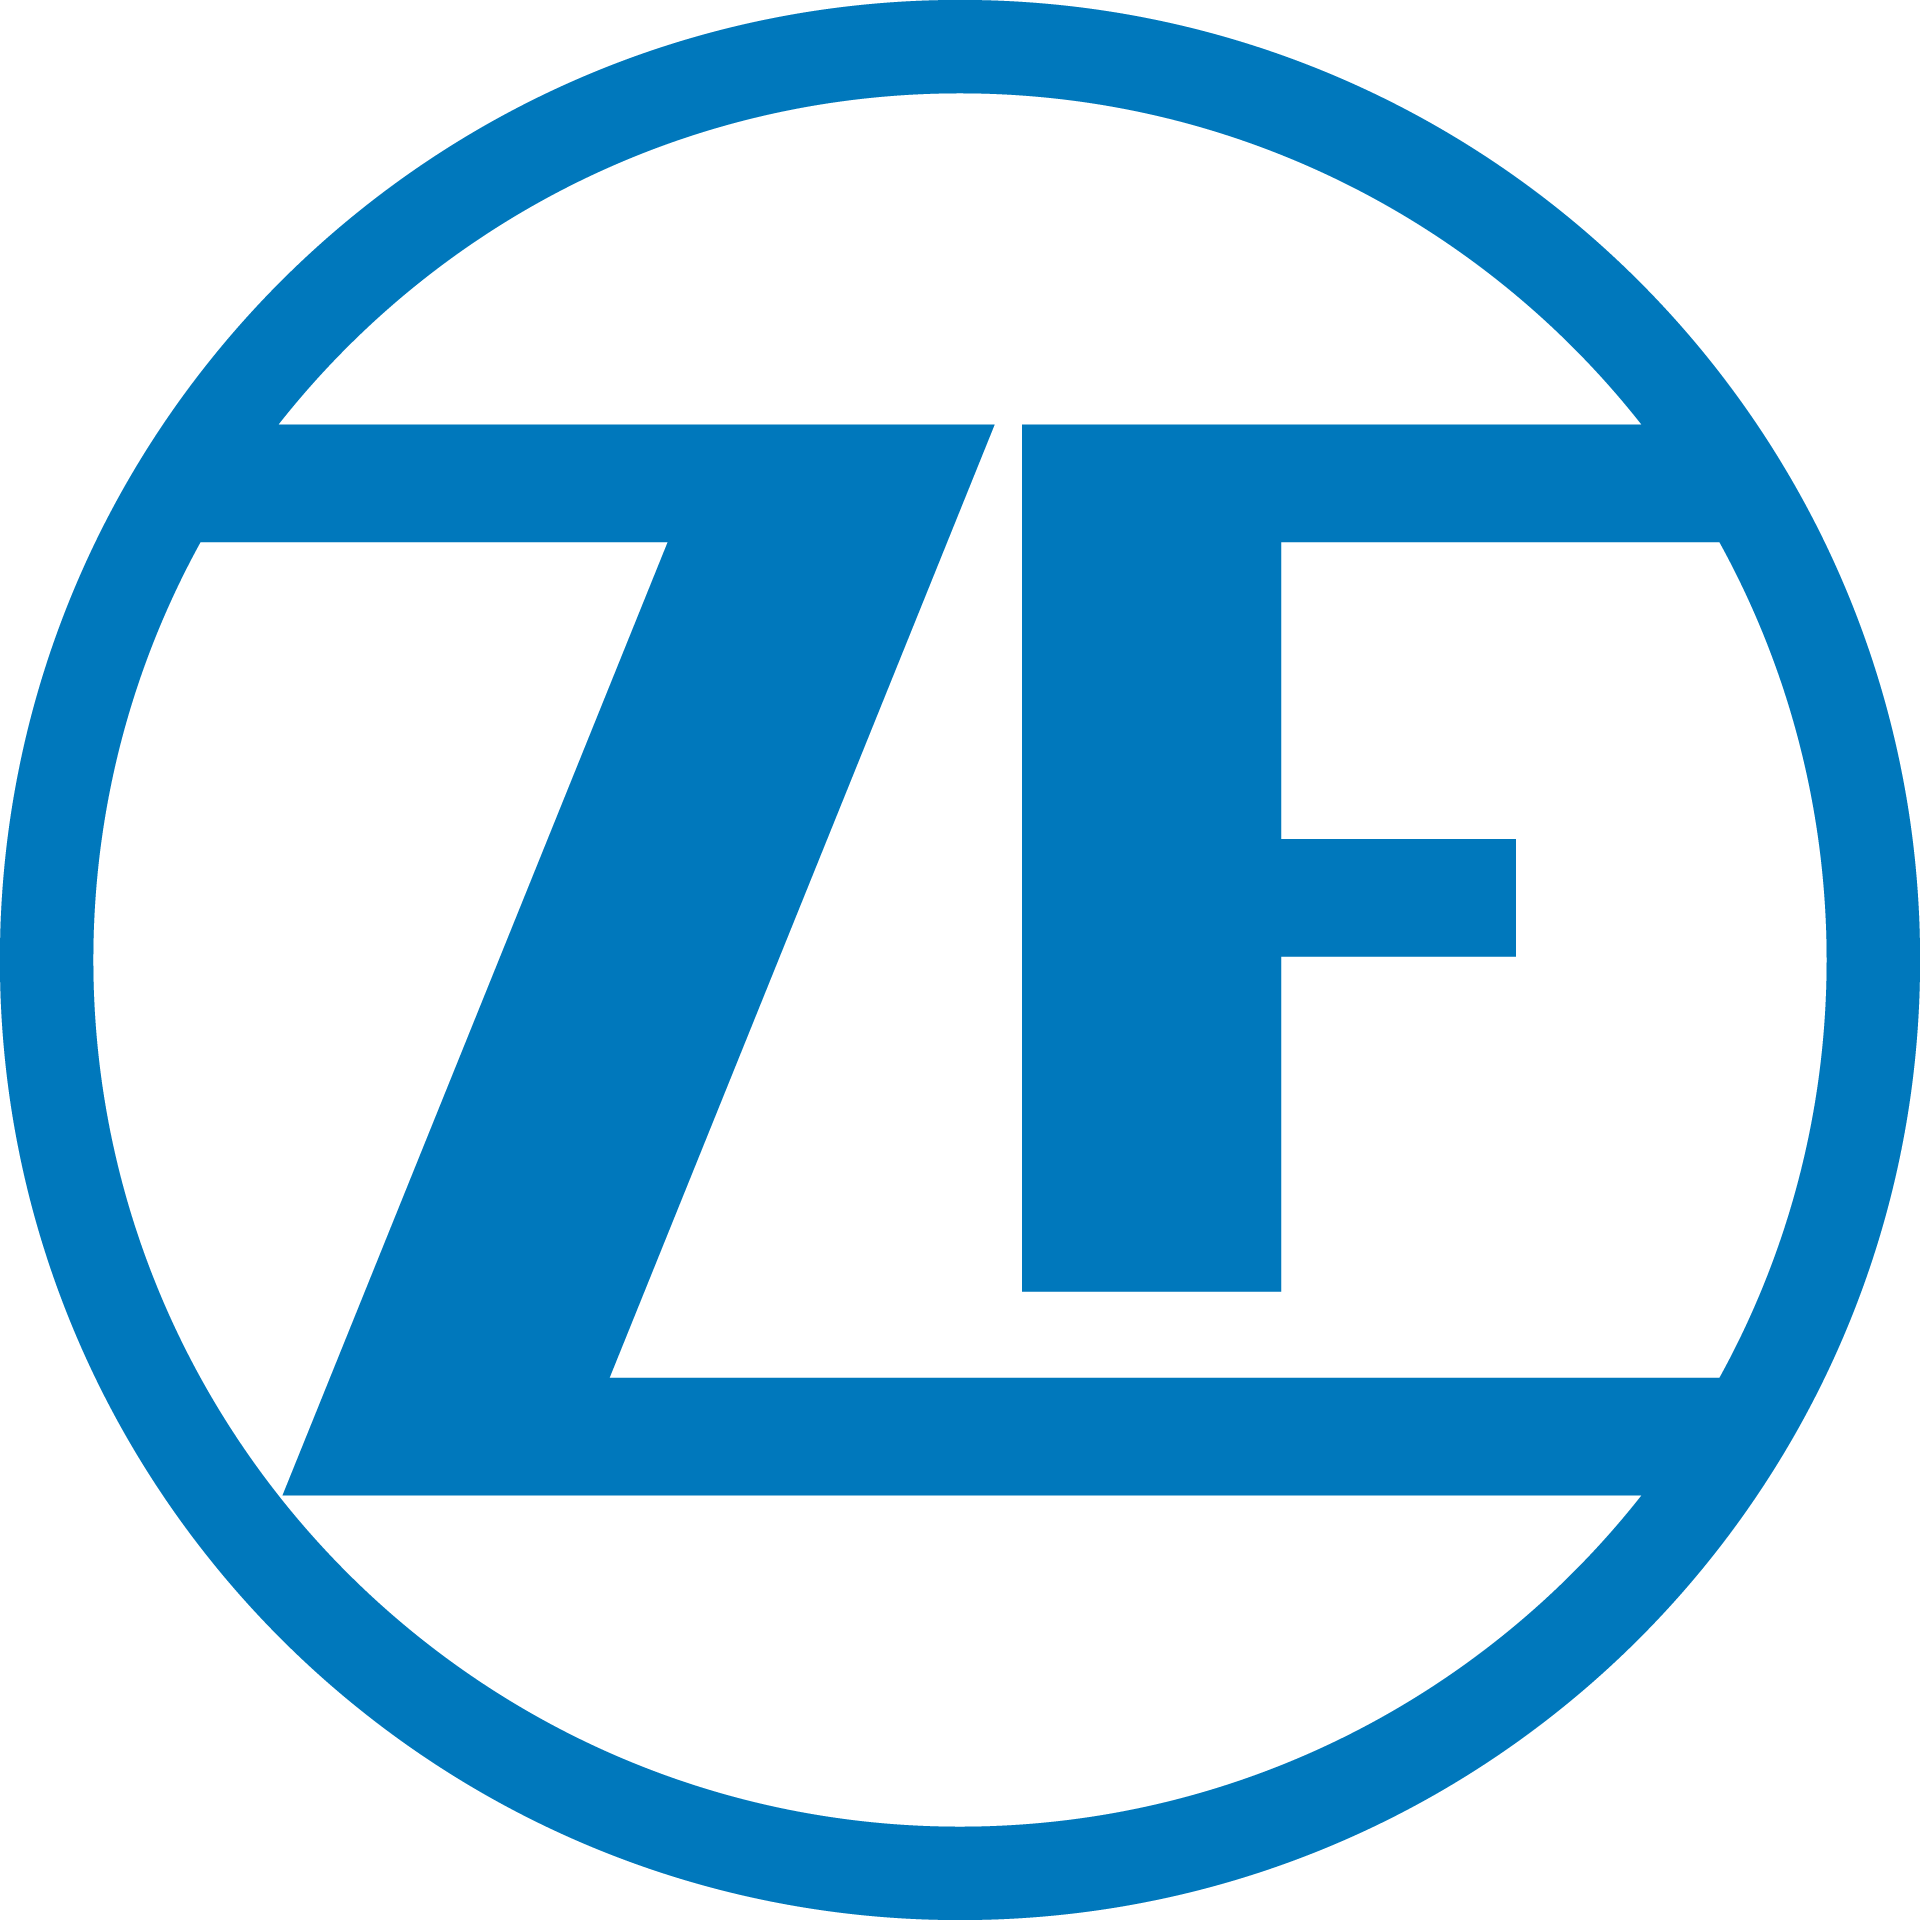 ZF Group: Digital Innovation to the Public Sector